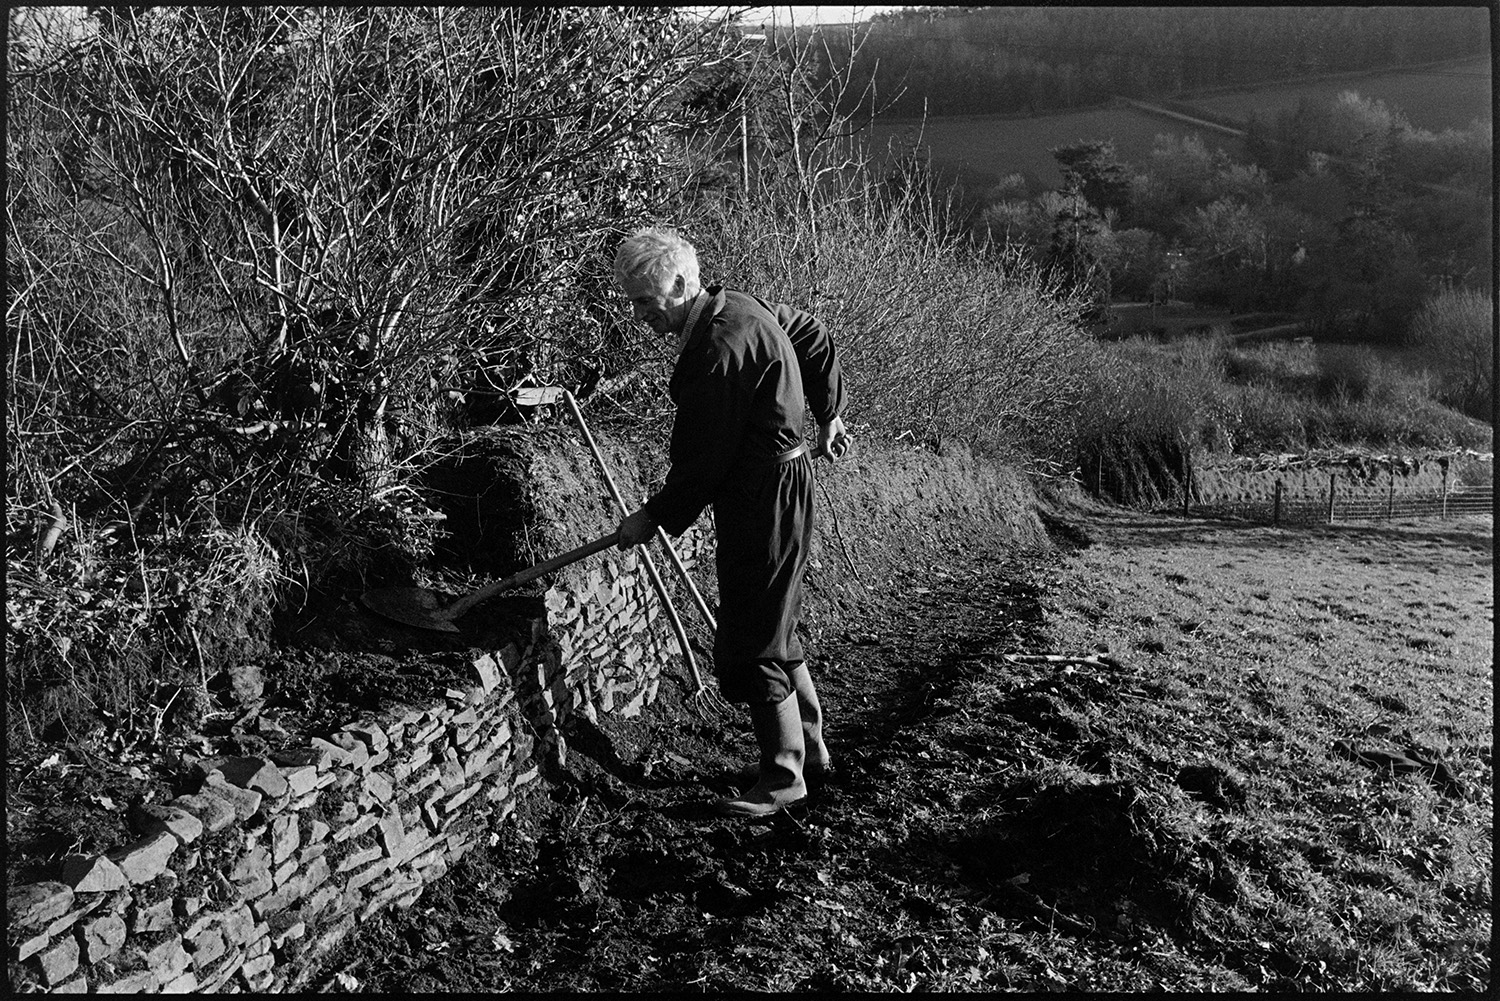 Man building hedge bank, putting earth on dry stone wall. 
[Geoff Darch building up a hedgebank with earth in a field at Chulmleigh. He is placing the earth on top of the dry stone wall at the bottom of the hedge with a spade.]